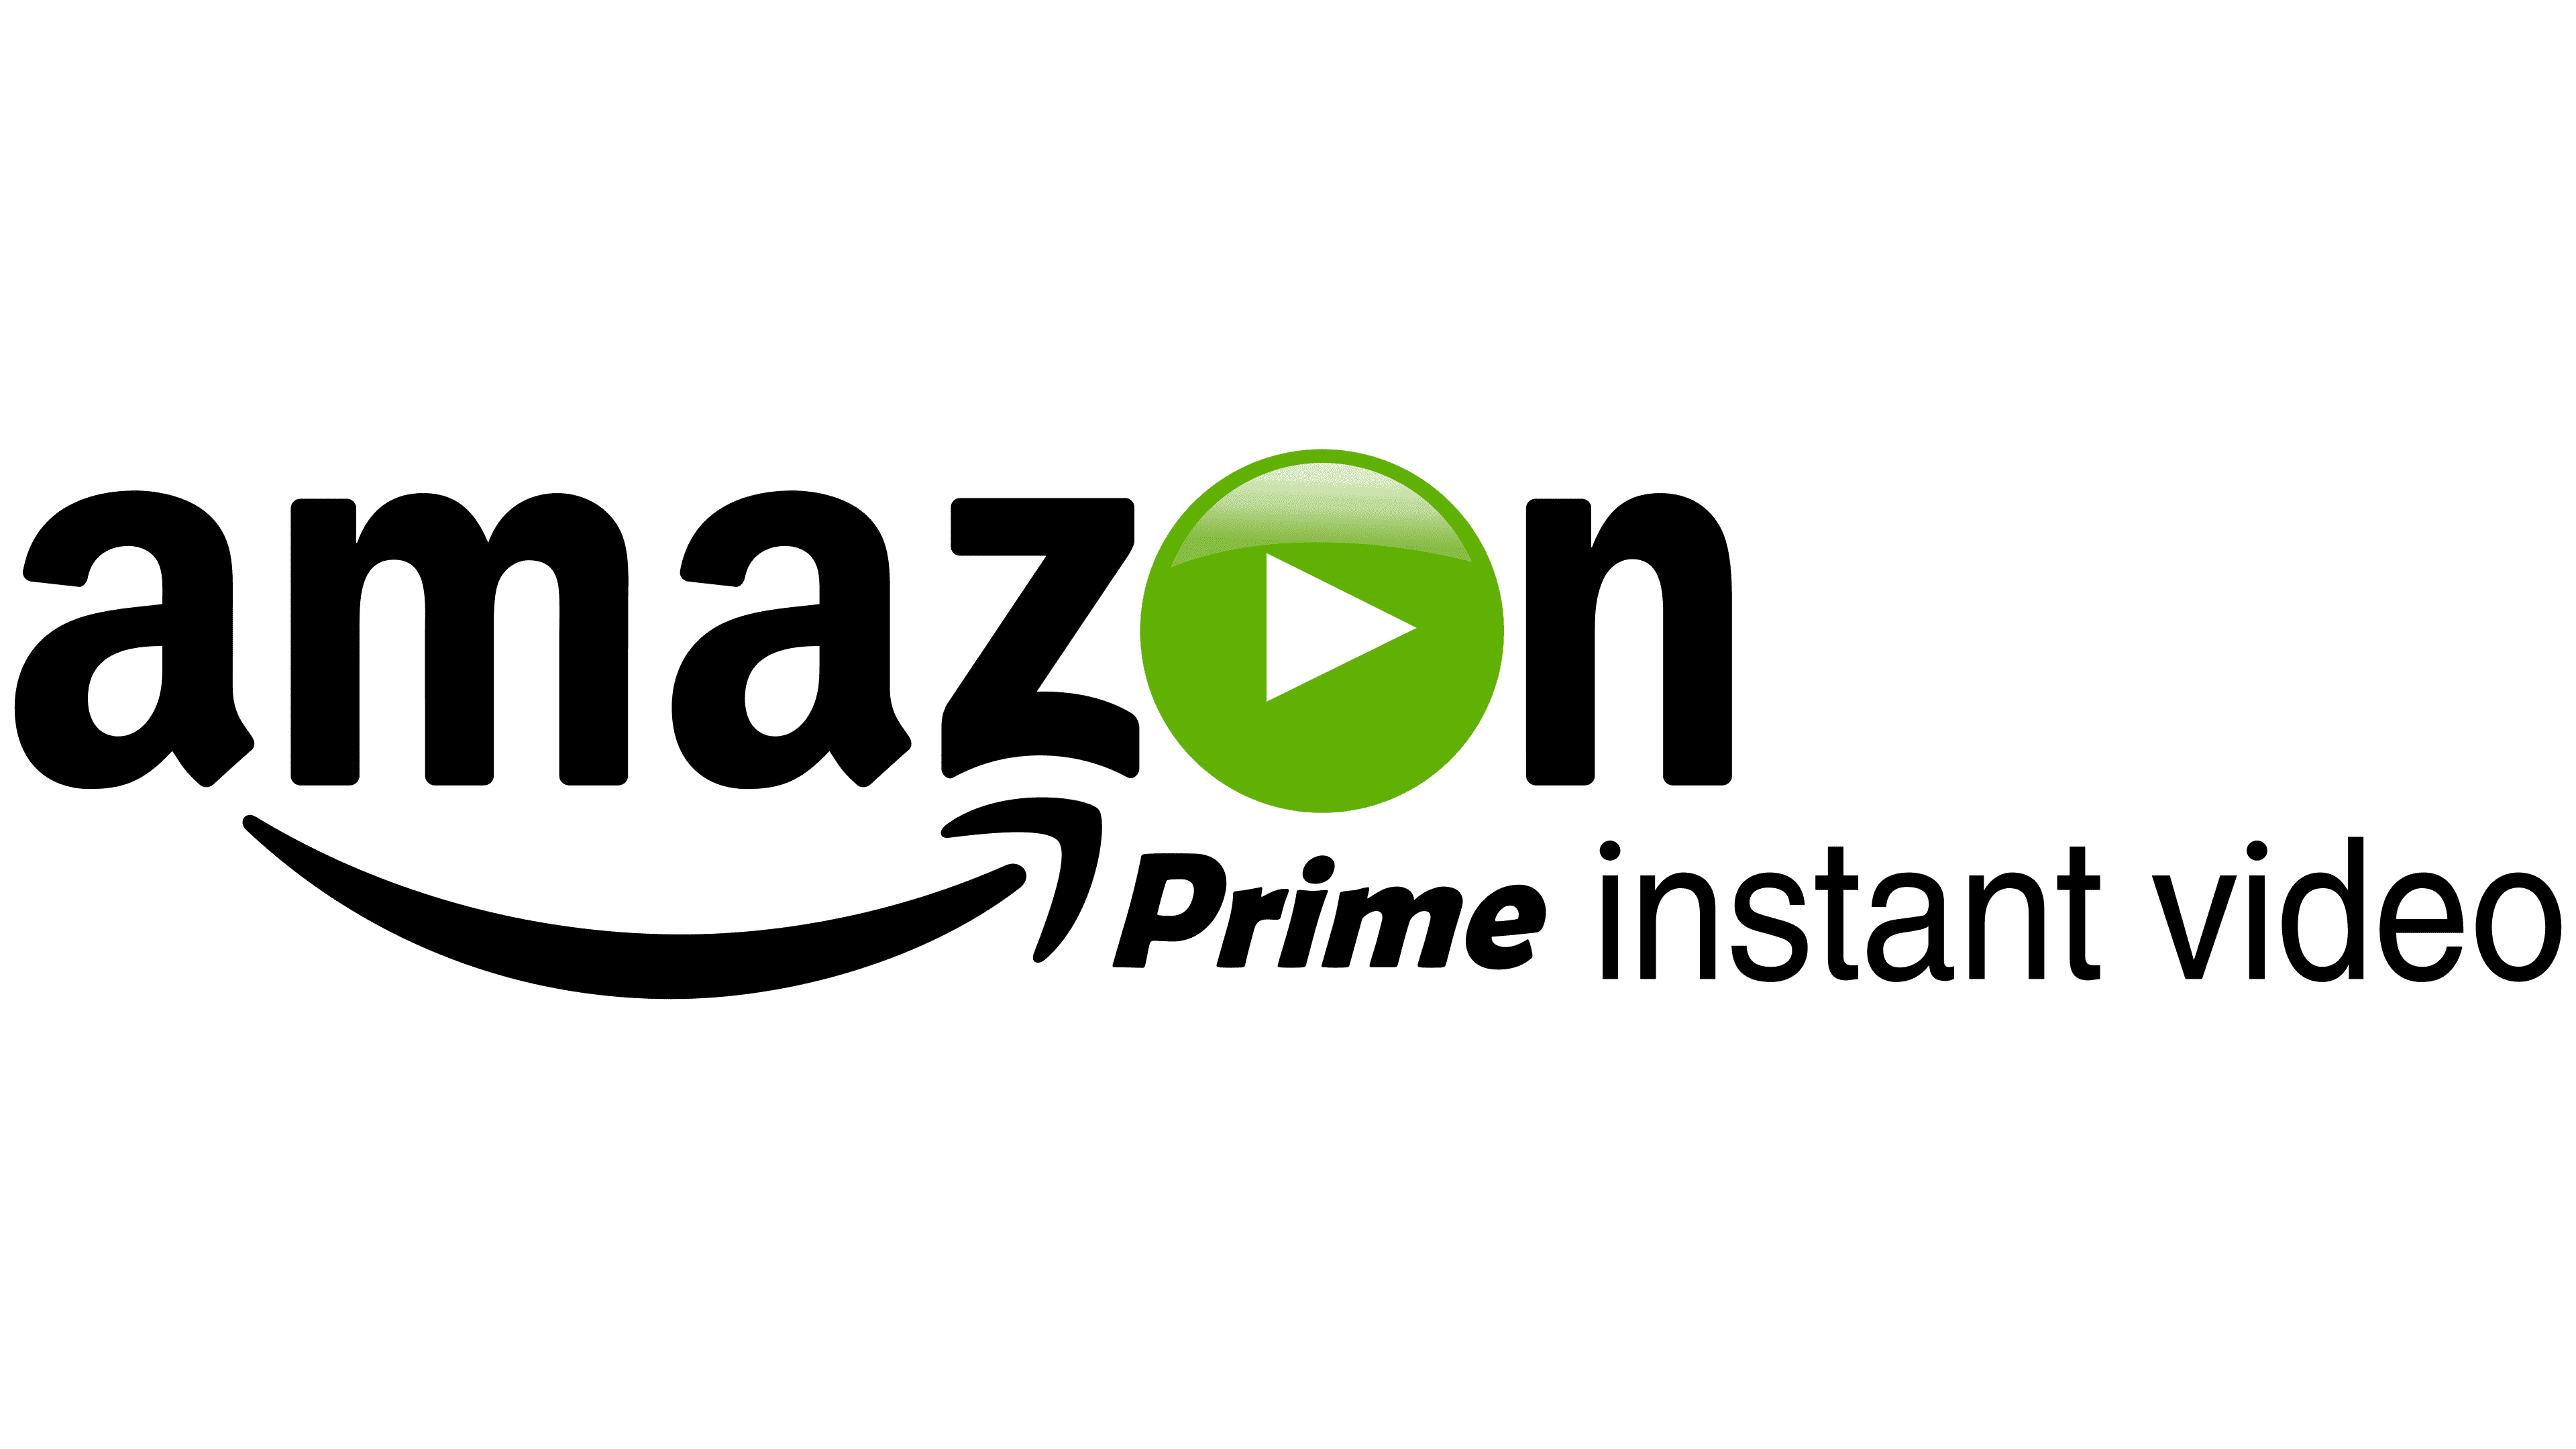 Amazon Prime Video Logo Meaning